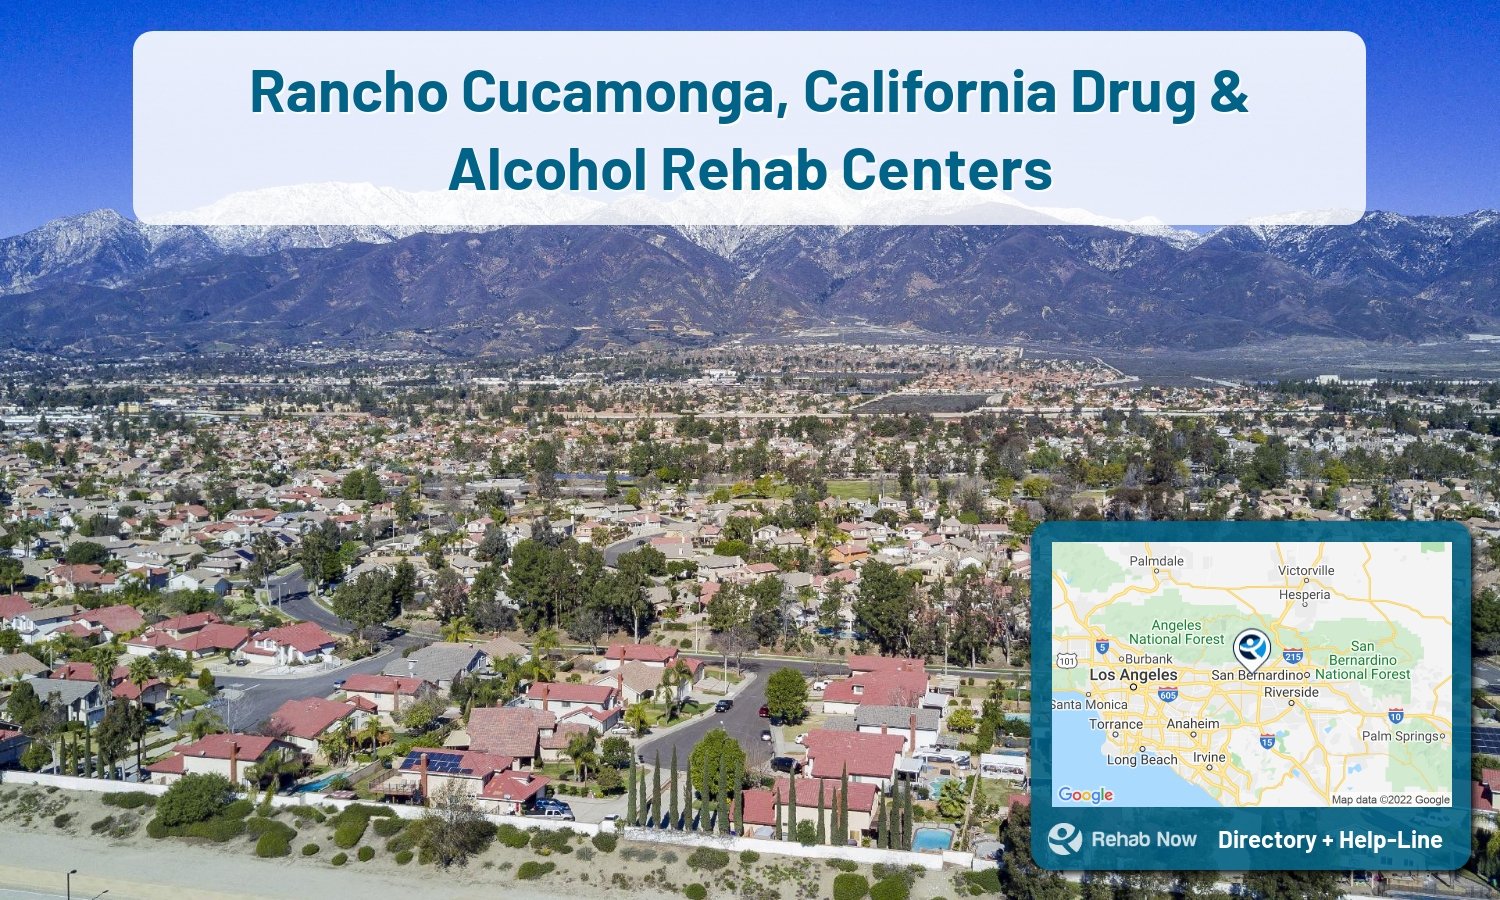 Let our expert counselors help find the best addiction treatment in Rancho Cucamonga, California now with a free call to our hotline.